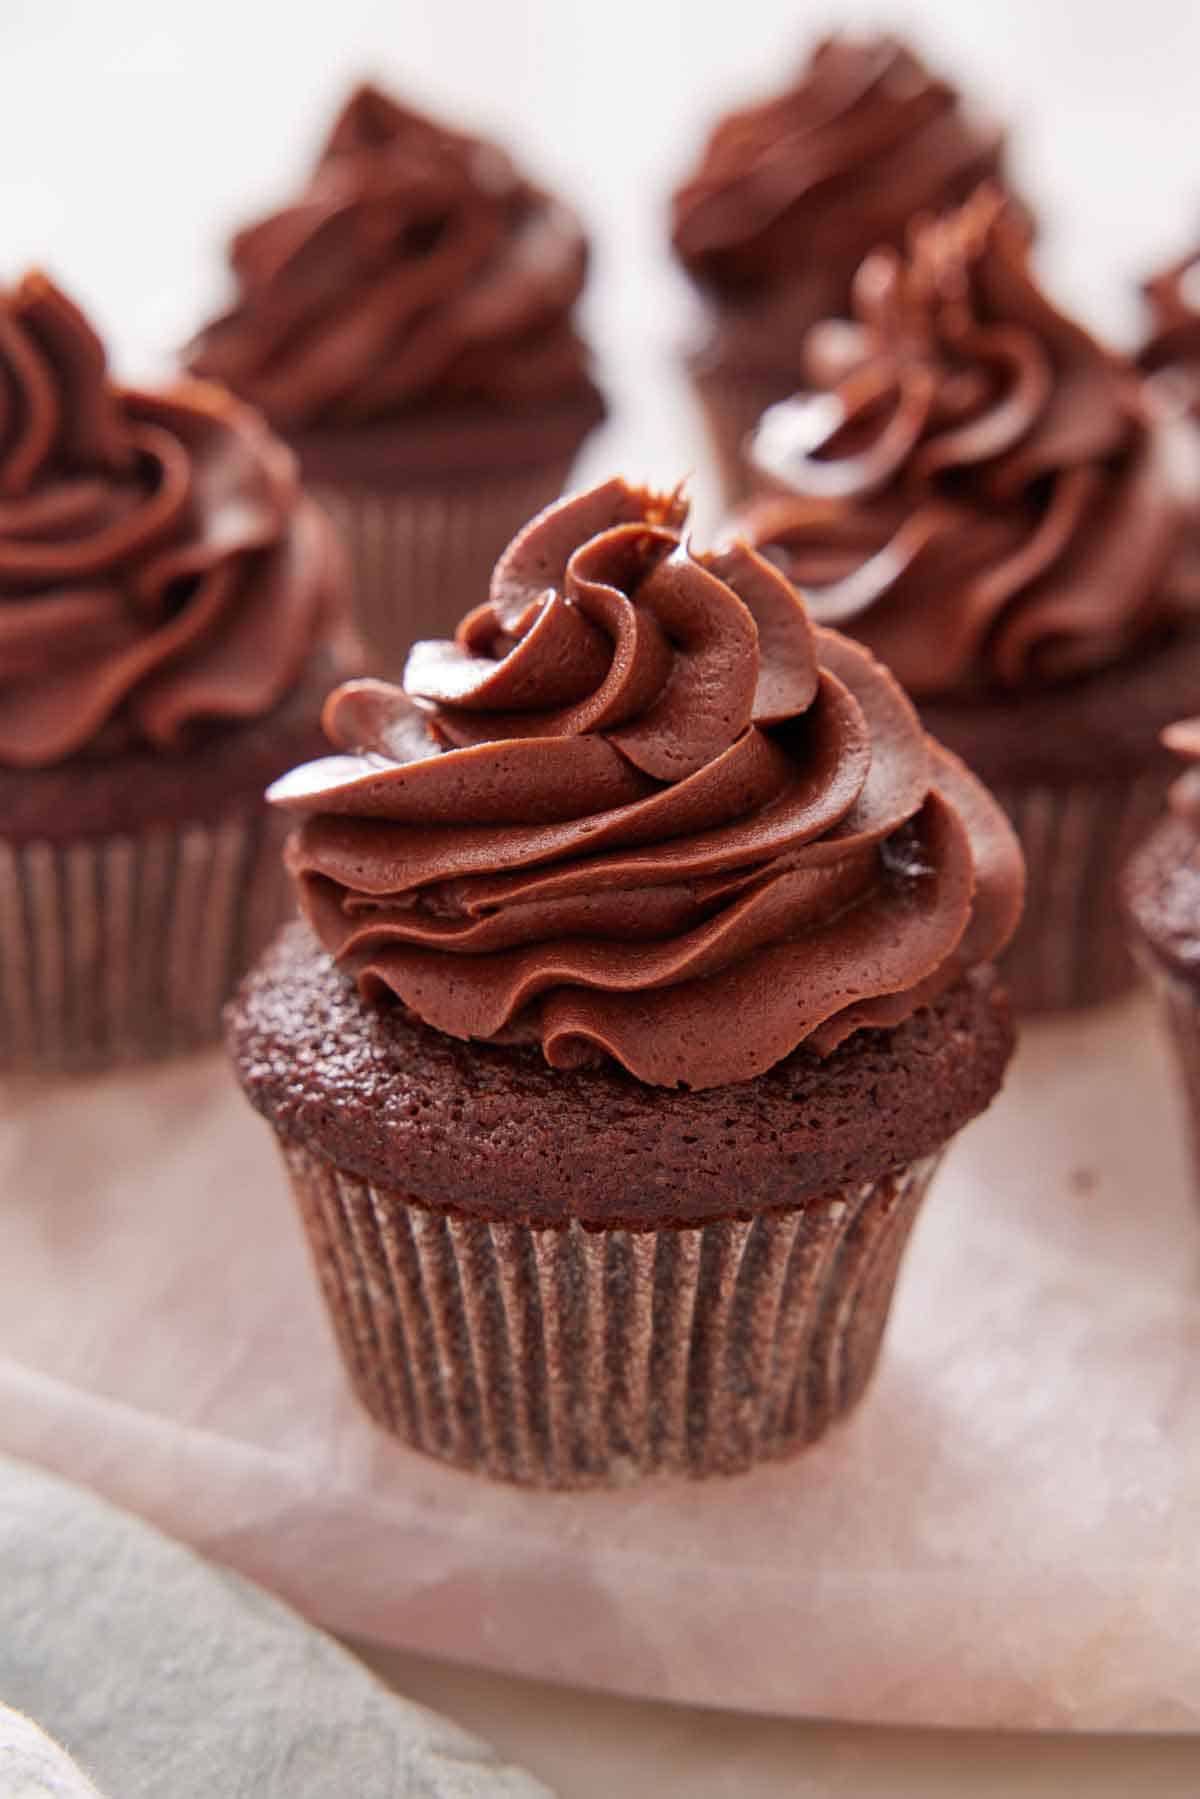 Multiple chocolate cupcakes with frosting on top with one in front.